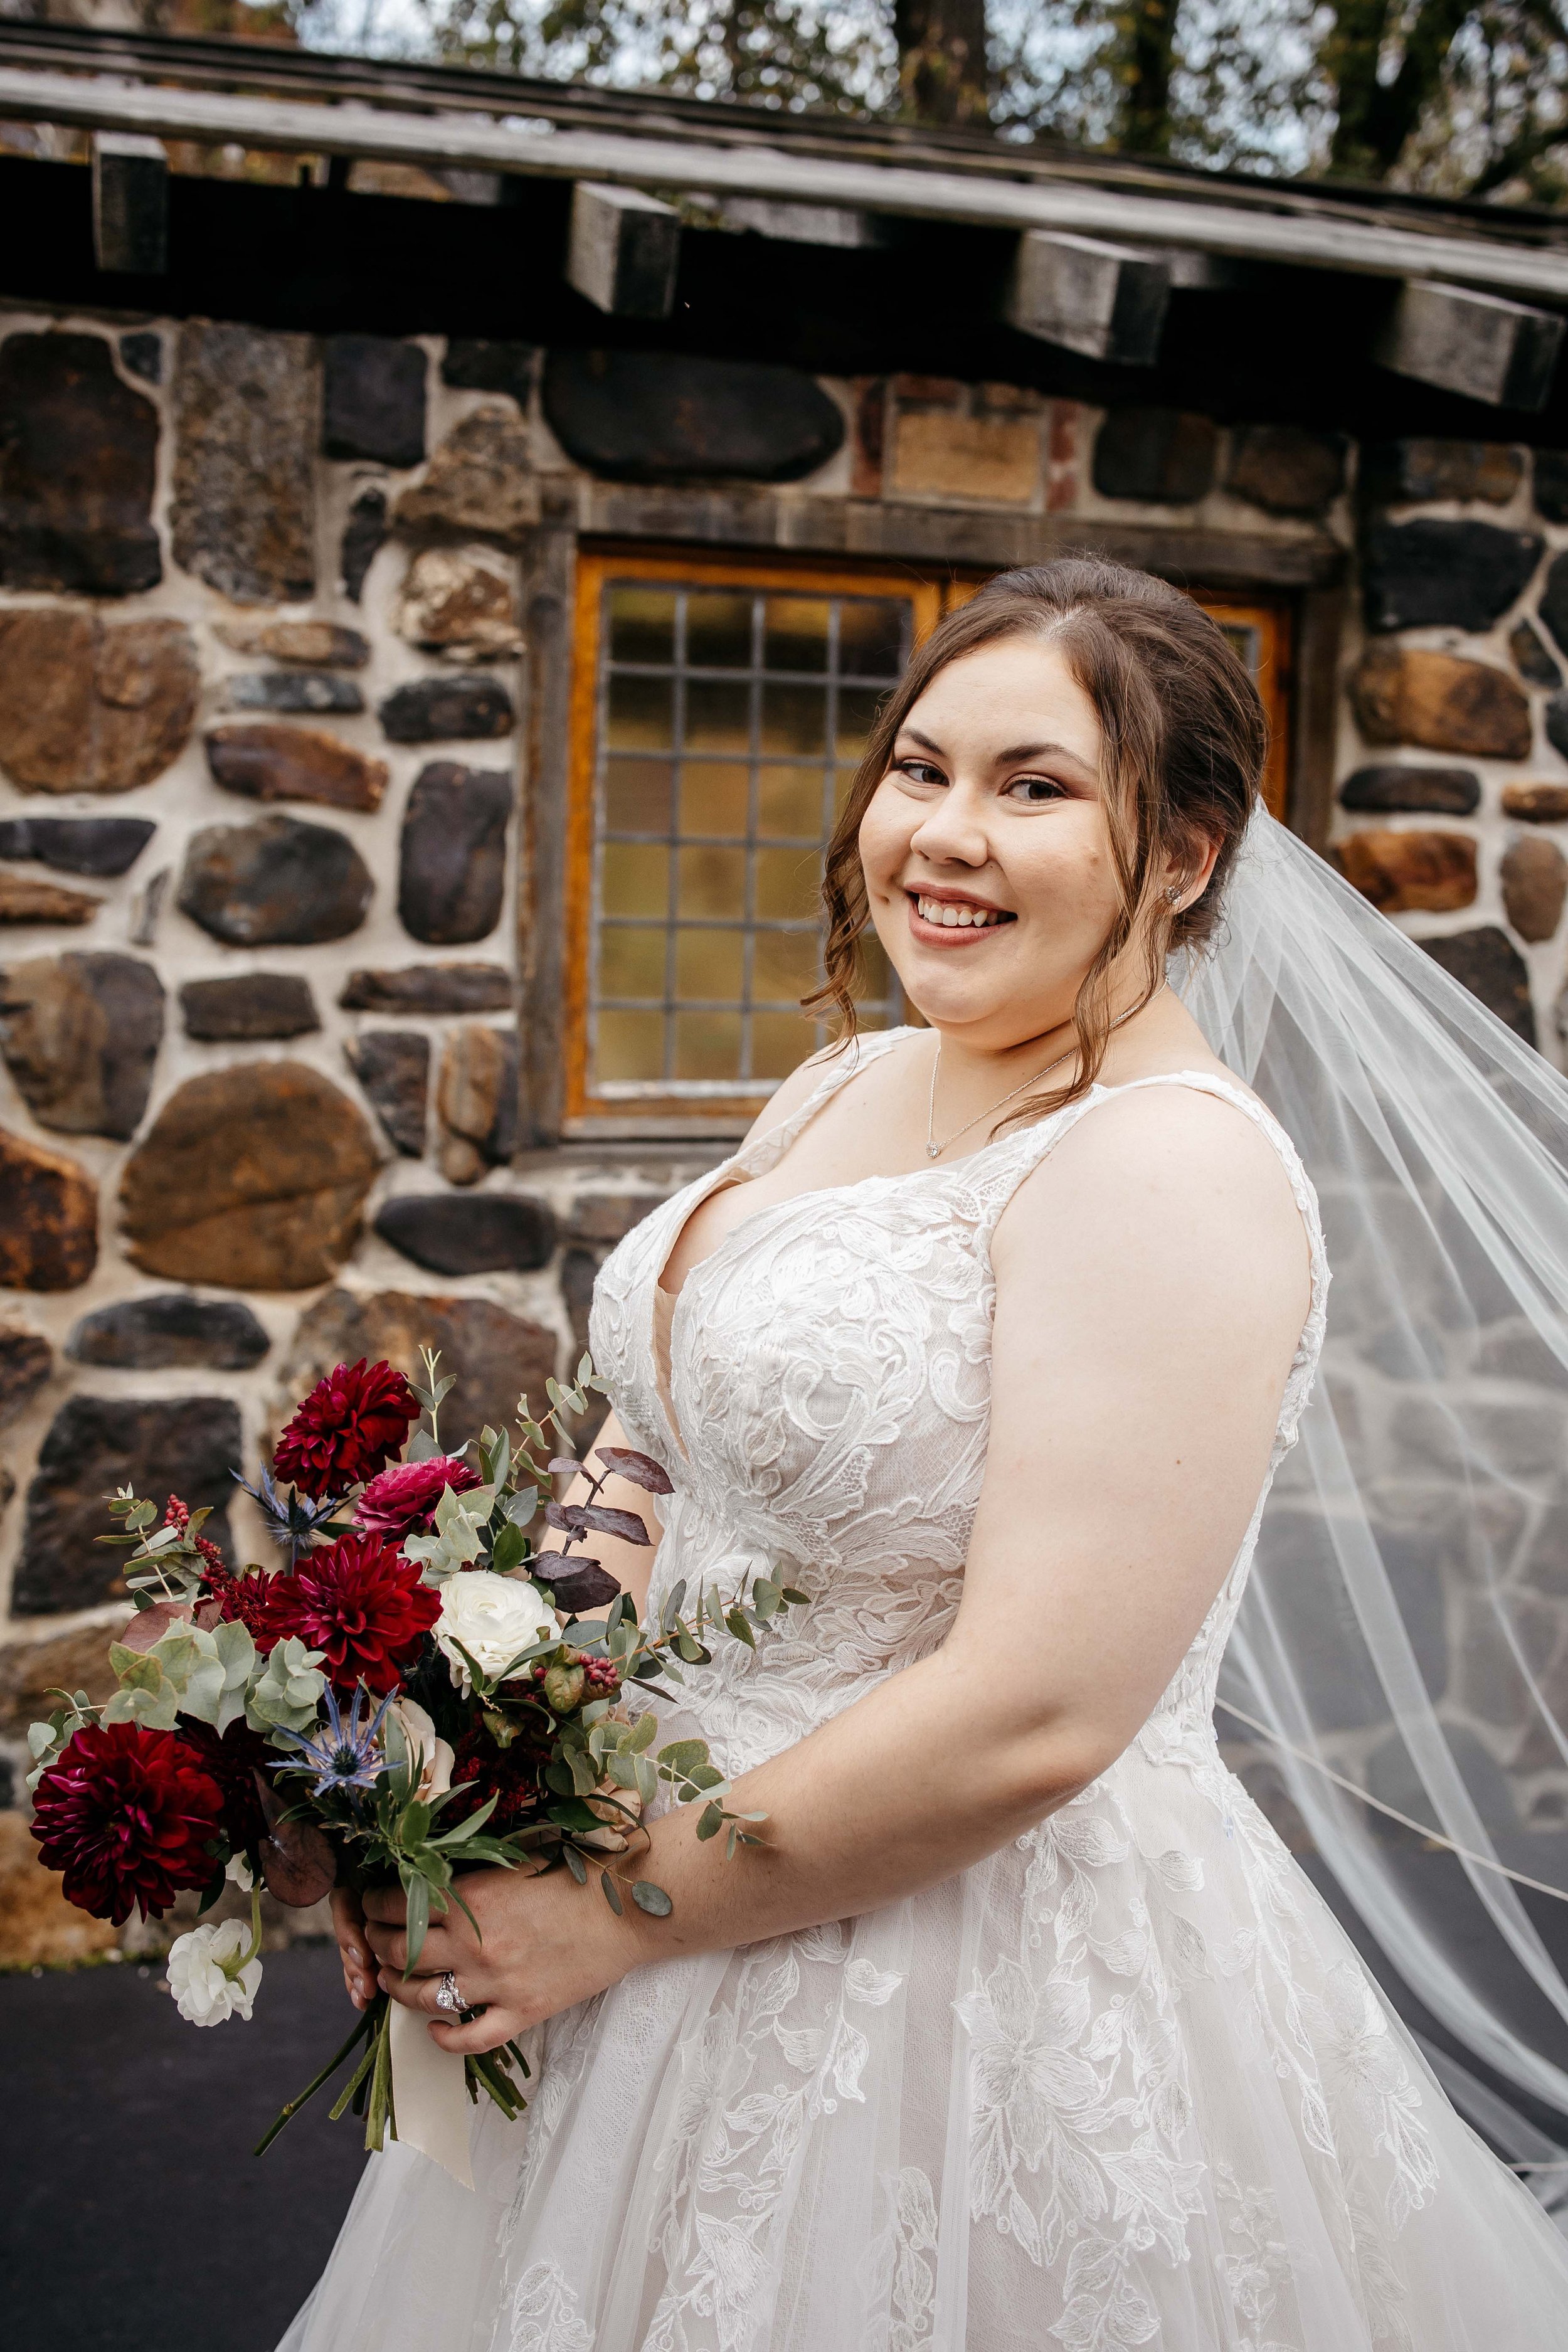 A bride with her bouquet.